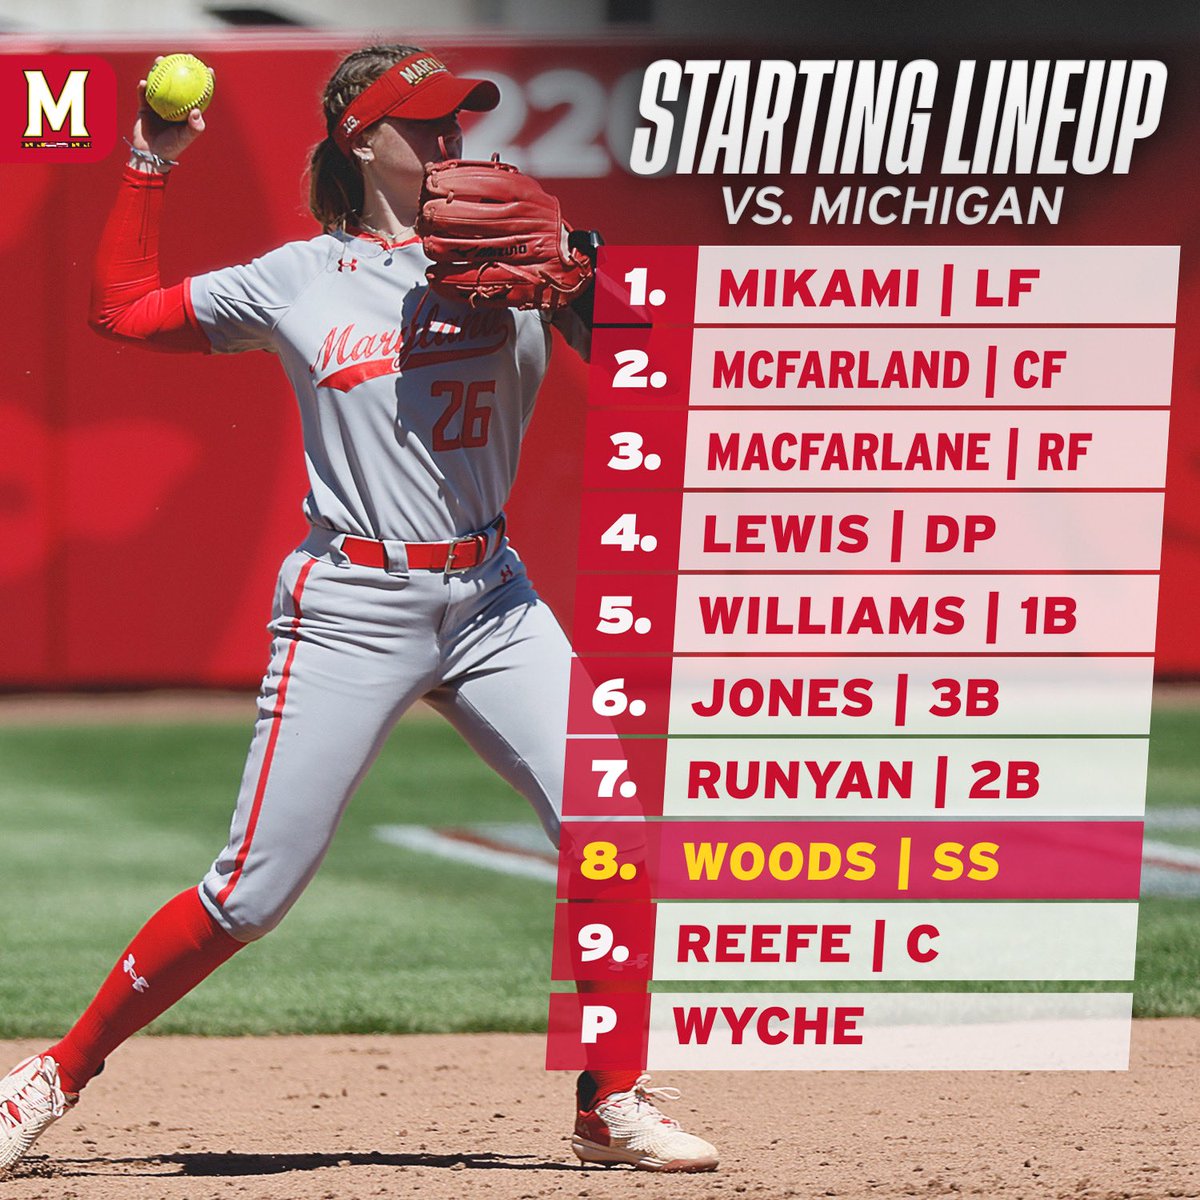 Today’s starting lineup vs. Michigan

First pitch at 6:35 p.m. EST🥎

📊 go.umd.edu/4dvSarY
📺 go.umd.edu/4d2Dv7s (BTN)

#FearTheTurtle